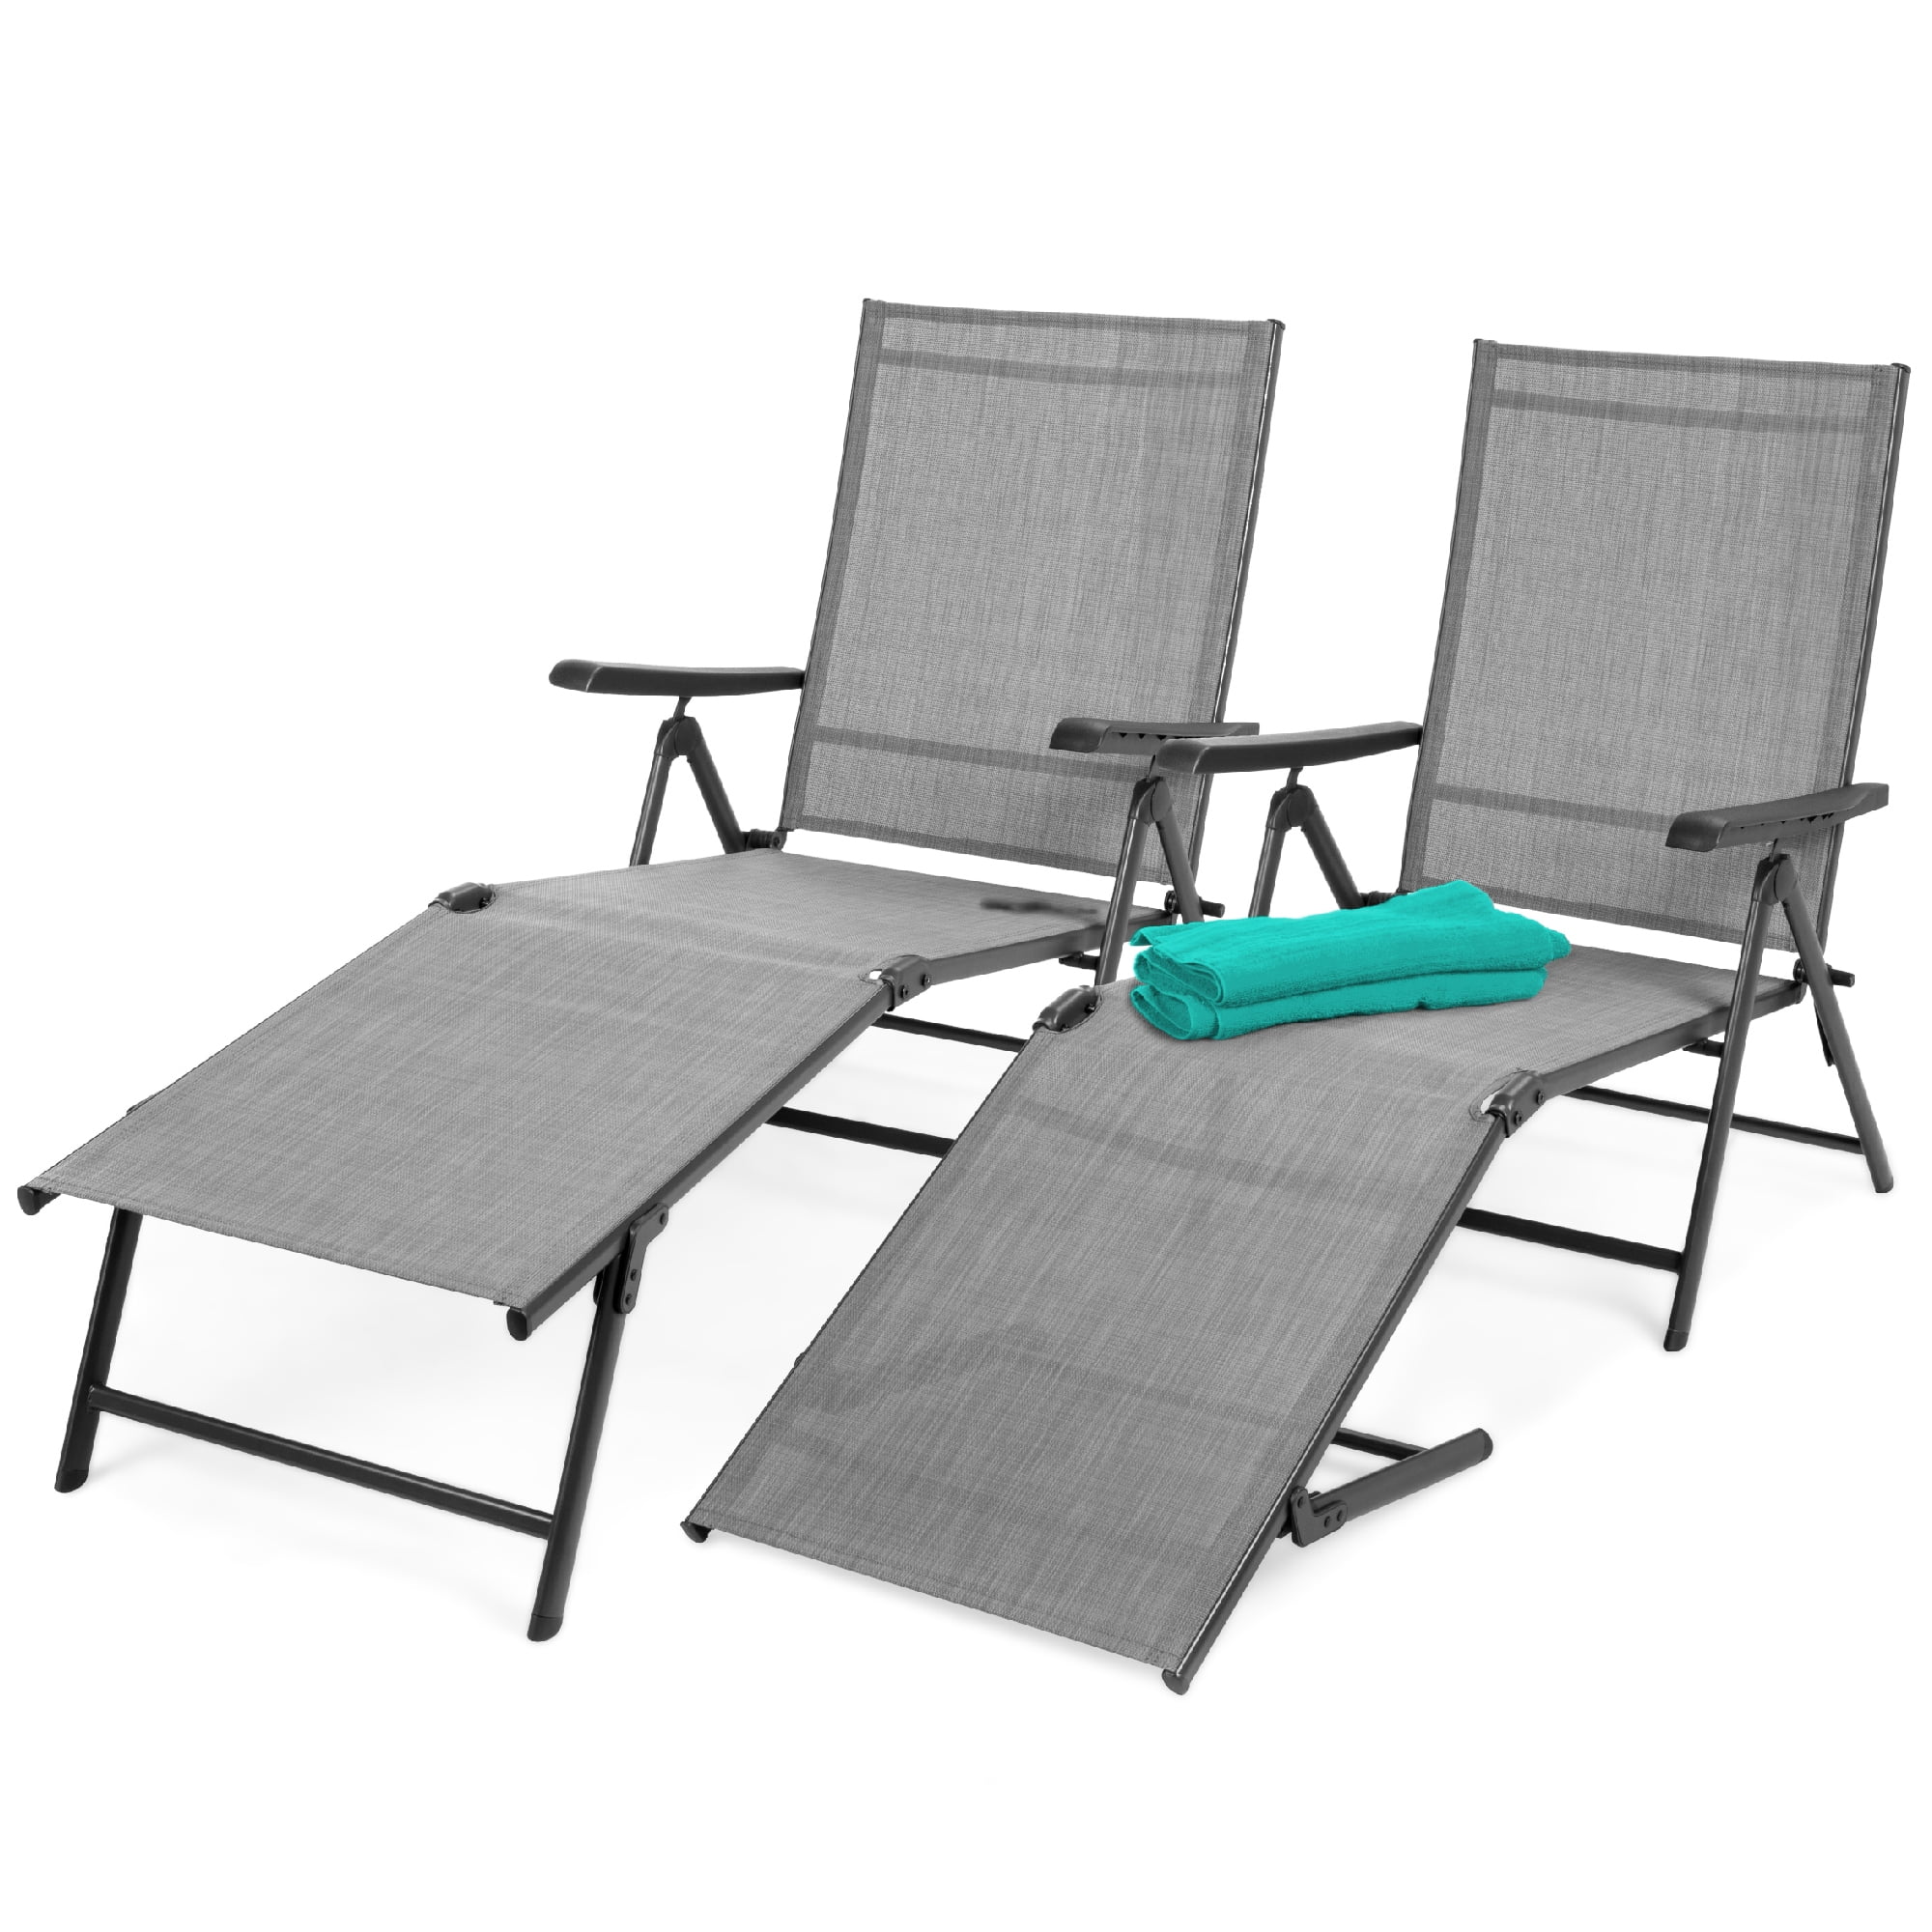 Outdoor Lounger Lawn Chair Spring Tanning Beach Camping Vintage Blue Pool Seat 